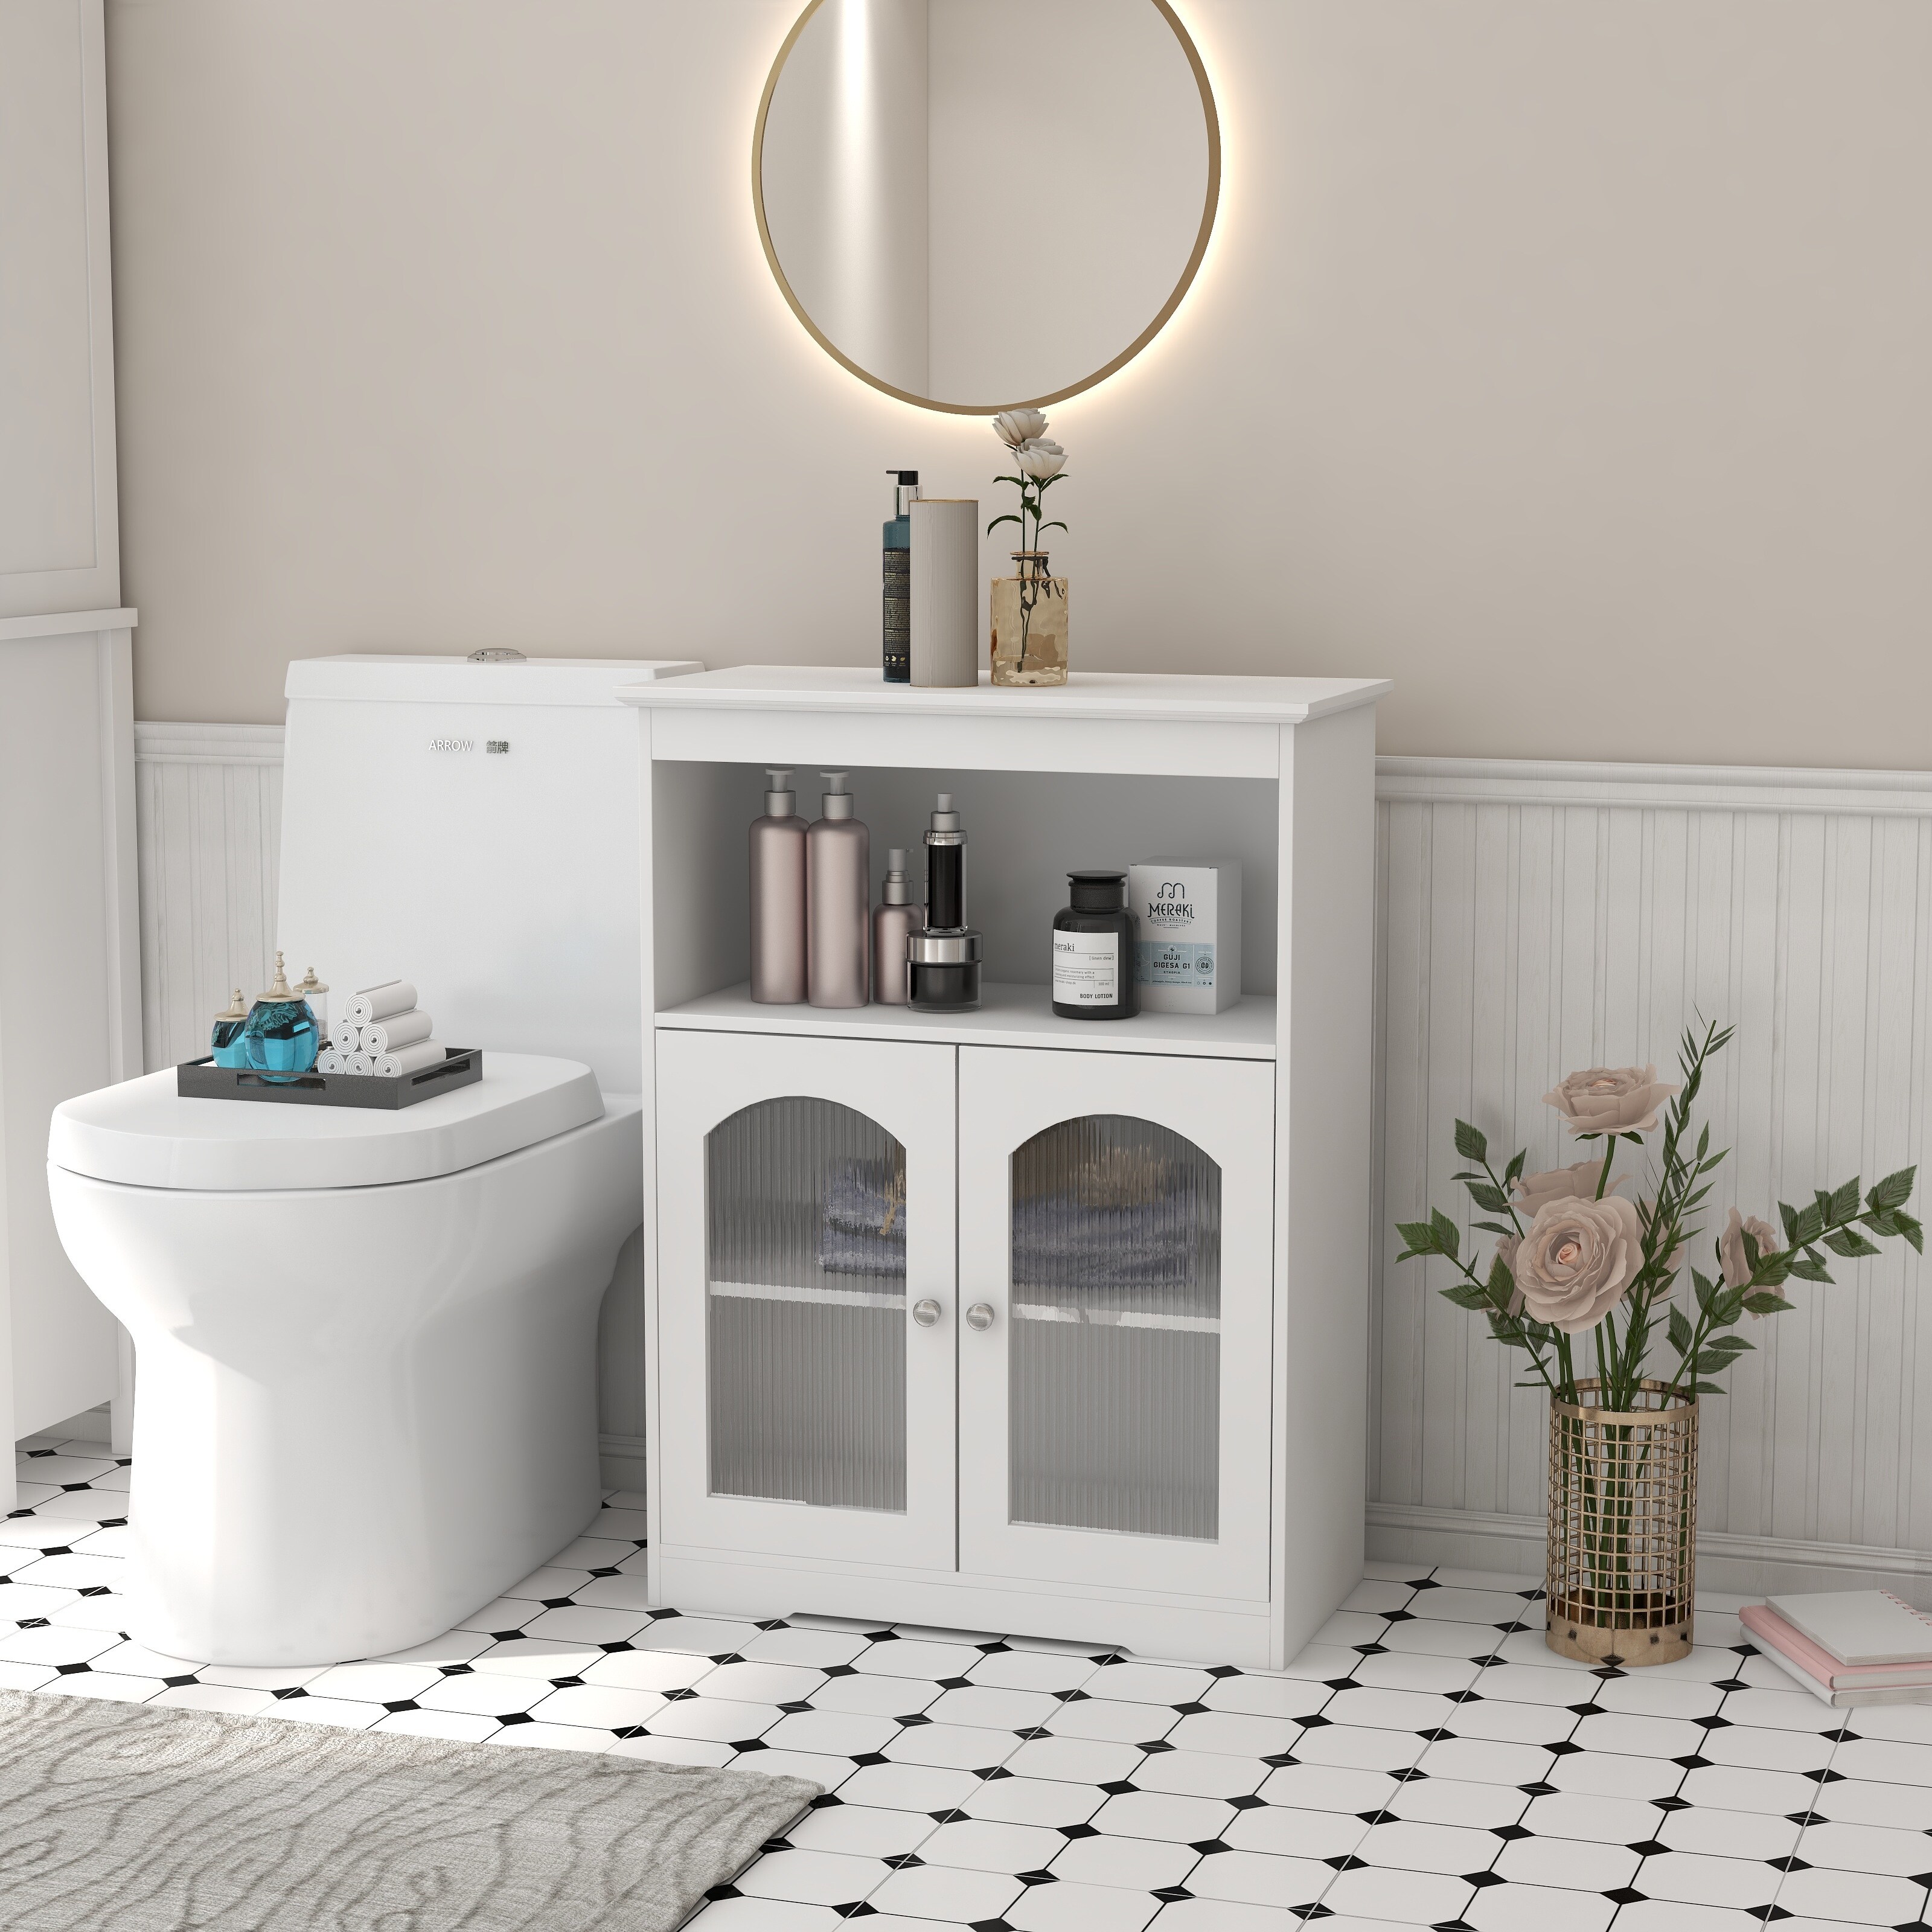 https://ak1.ostkcdn.com/images/products/is/images/direct/830bcc1b97e87e5948b98a14e7d6d3551e93017d/Nestfair-White-Bathroom-Cabinet-with-Glass-Door.jpg